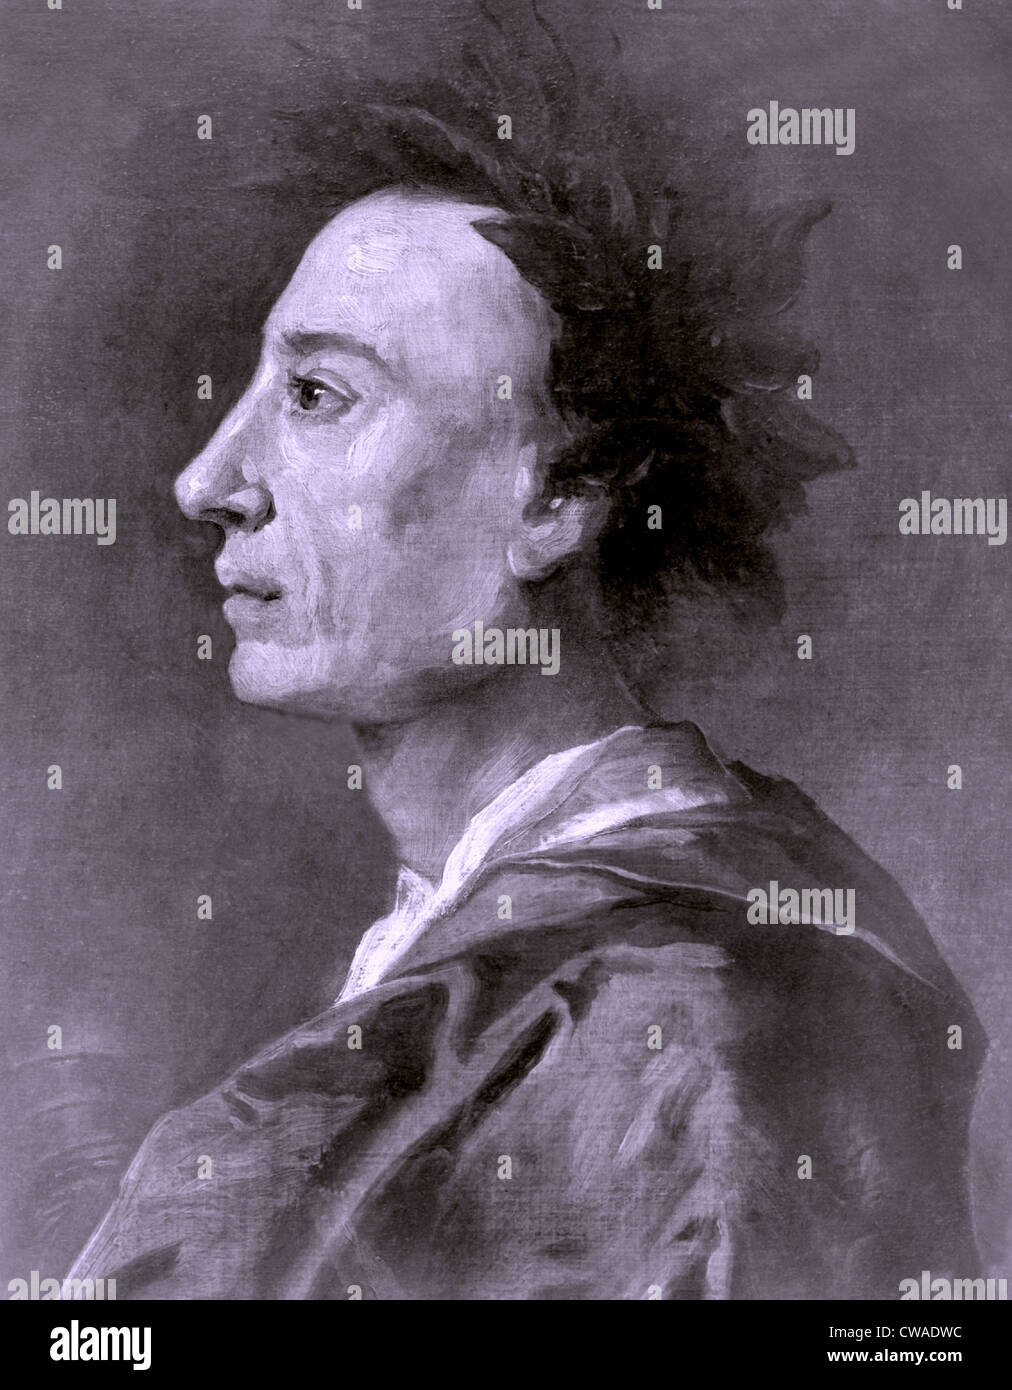 Alexander Pope (1688-1744) was one of the most important English poet and writers of the 18th century. Stock Photo